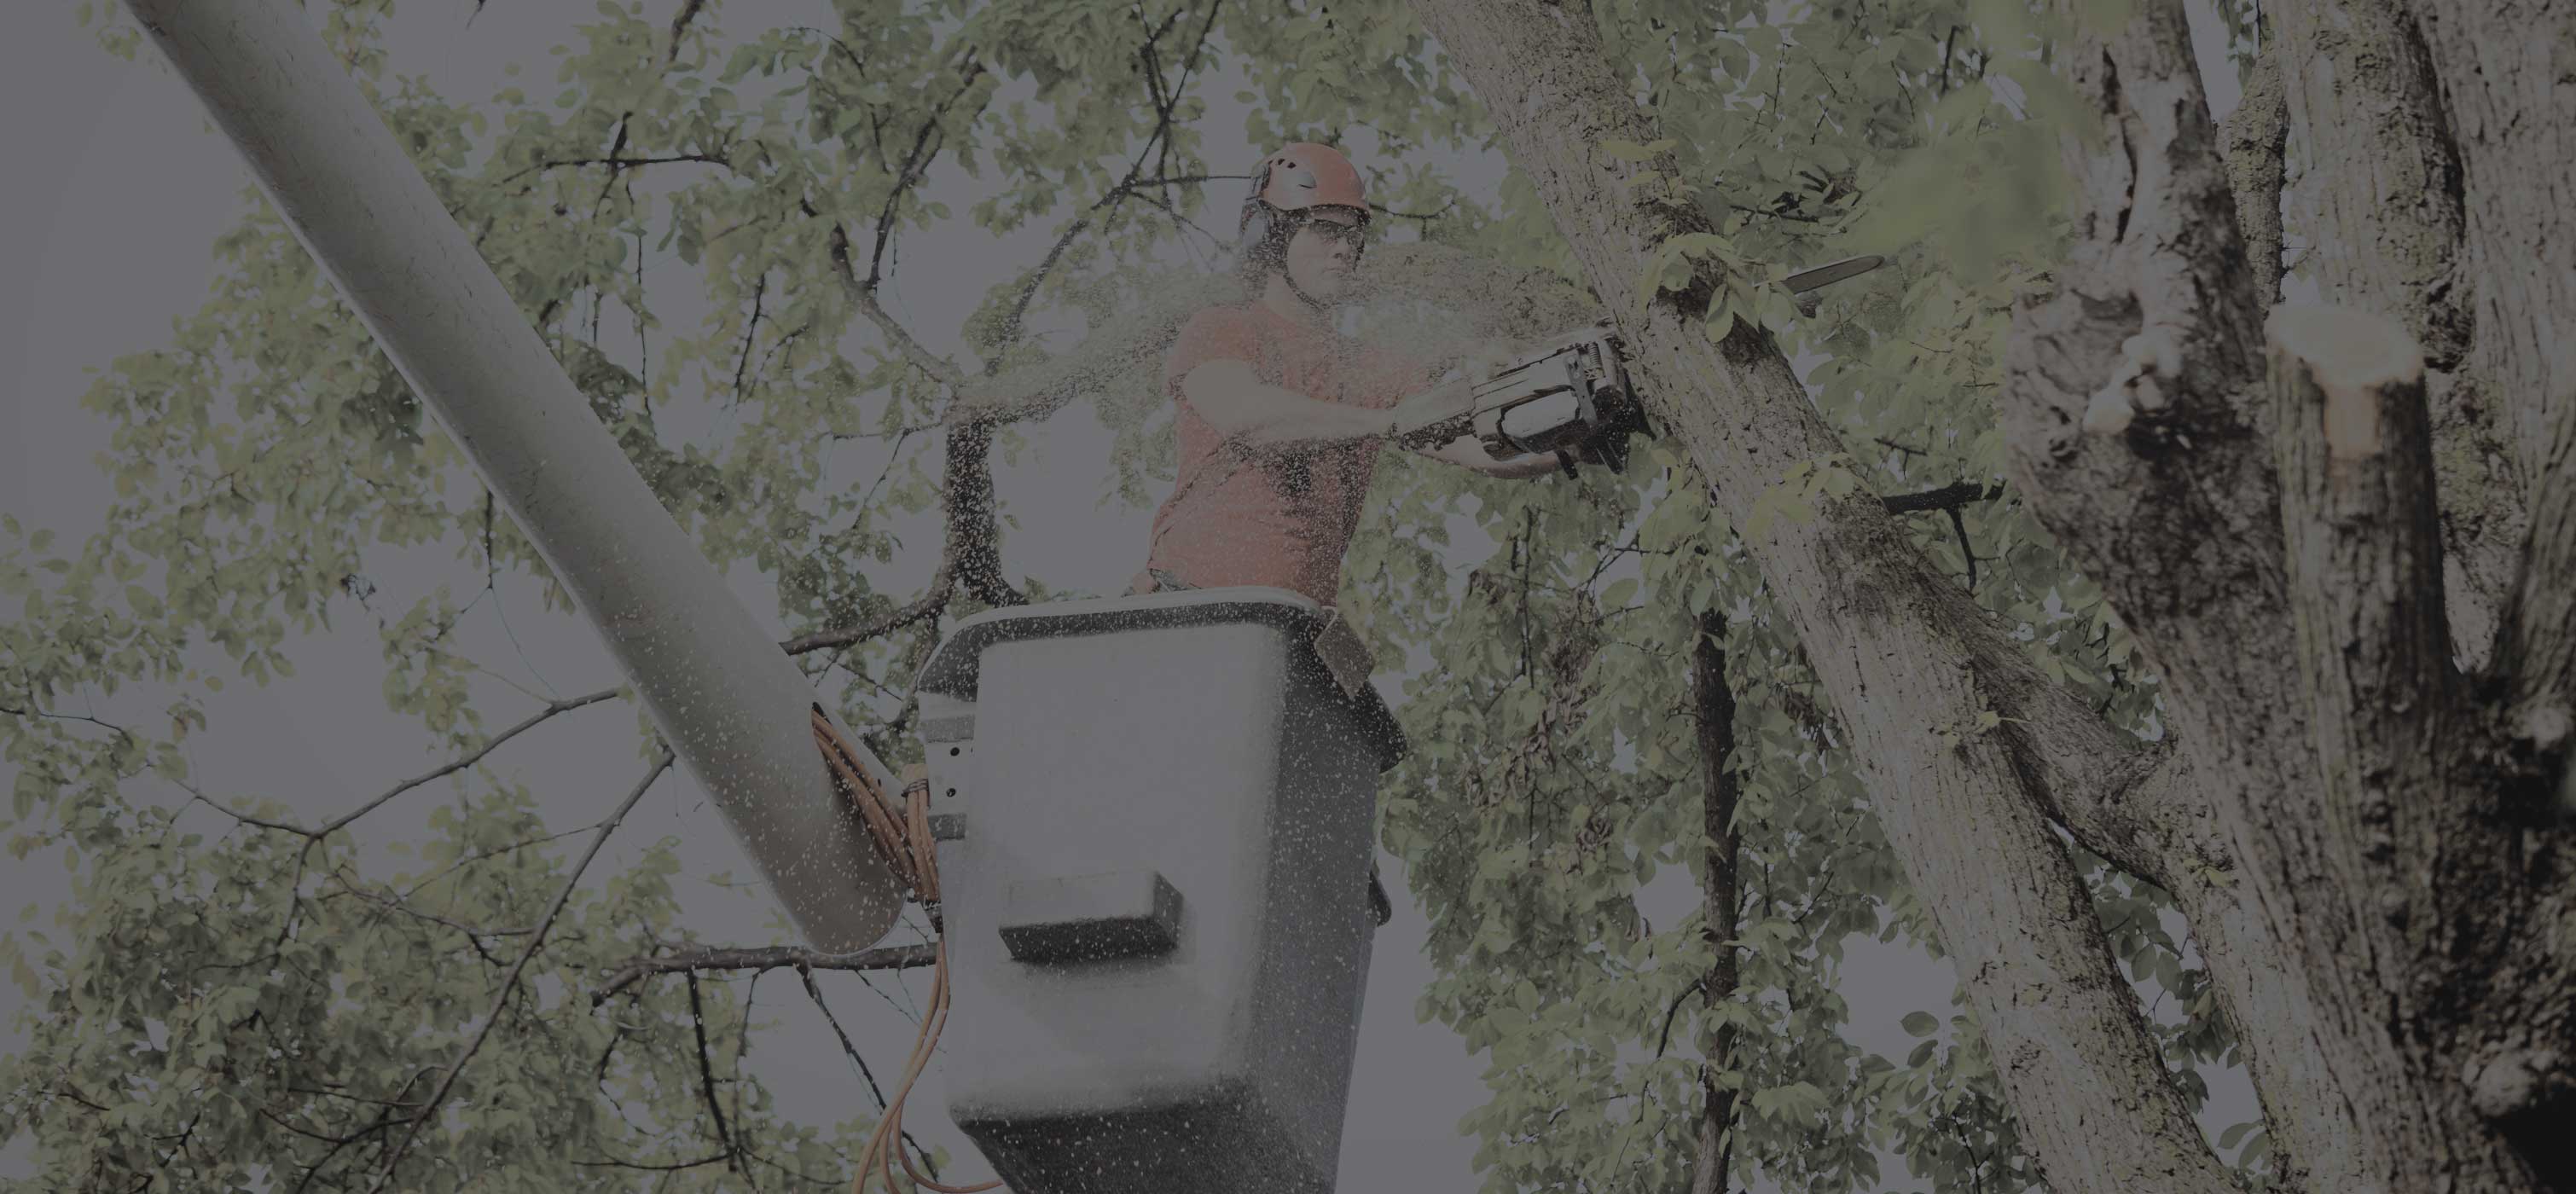 Person in a bucket lift sawing a limb of a tree with a chainsaw